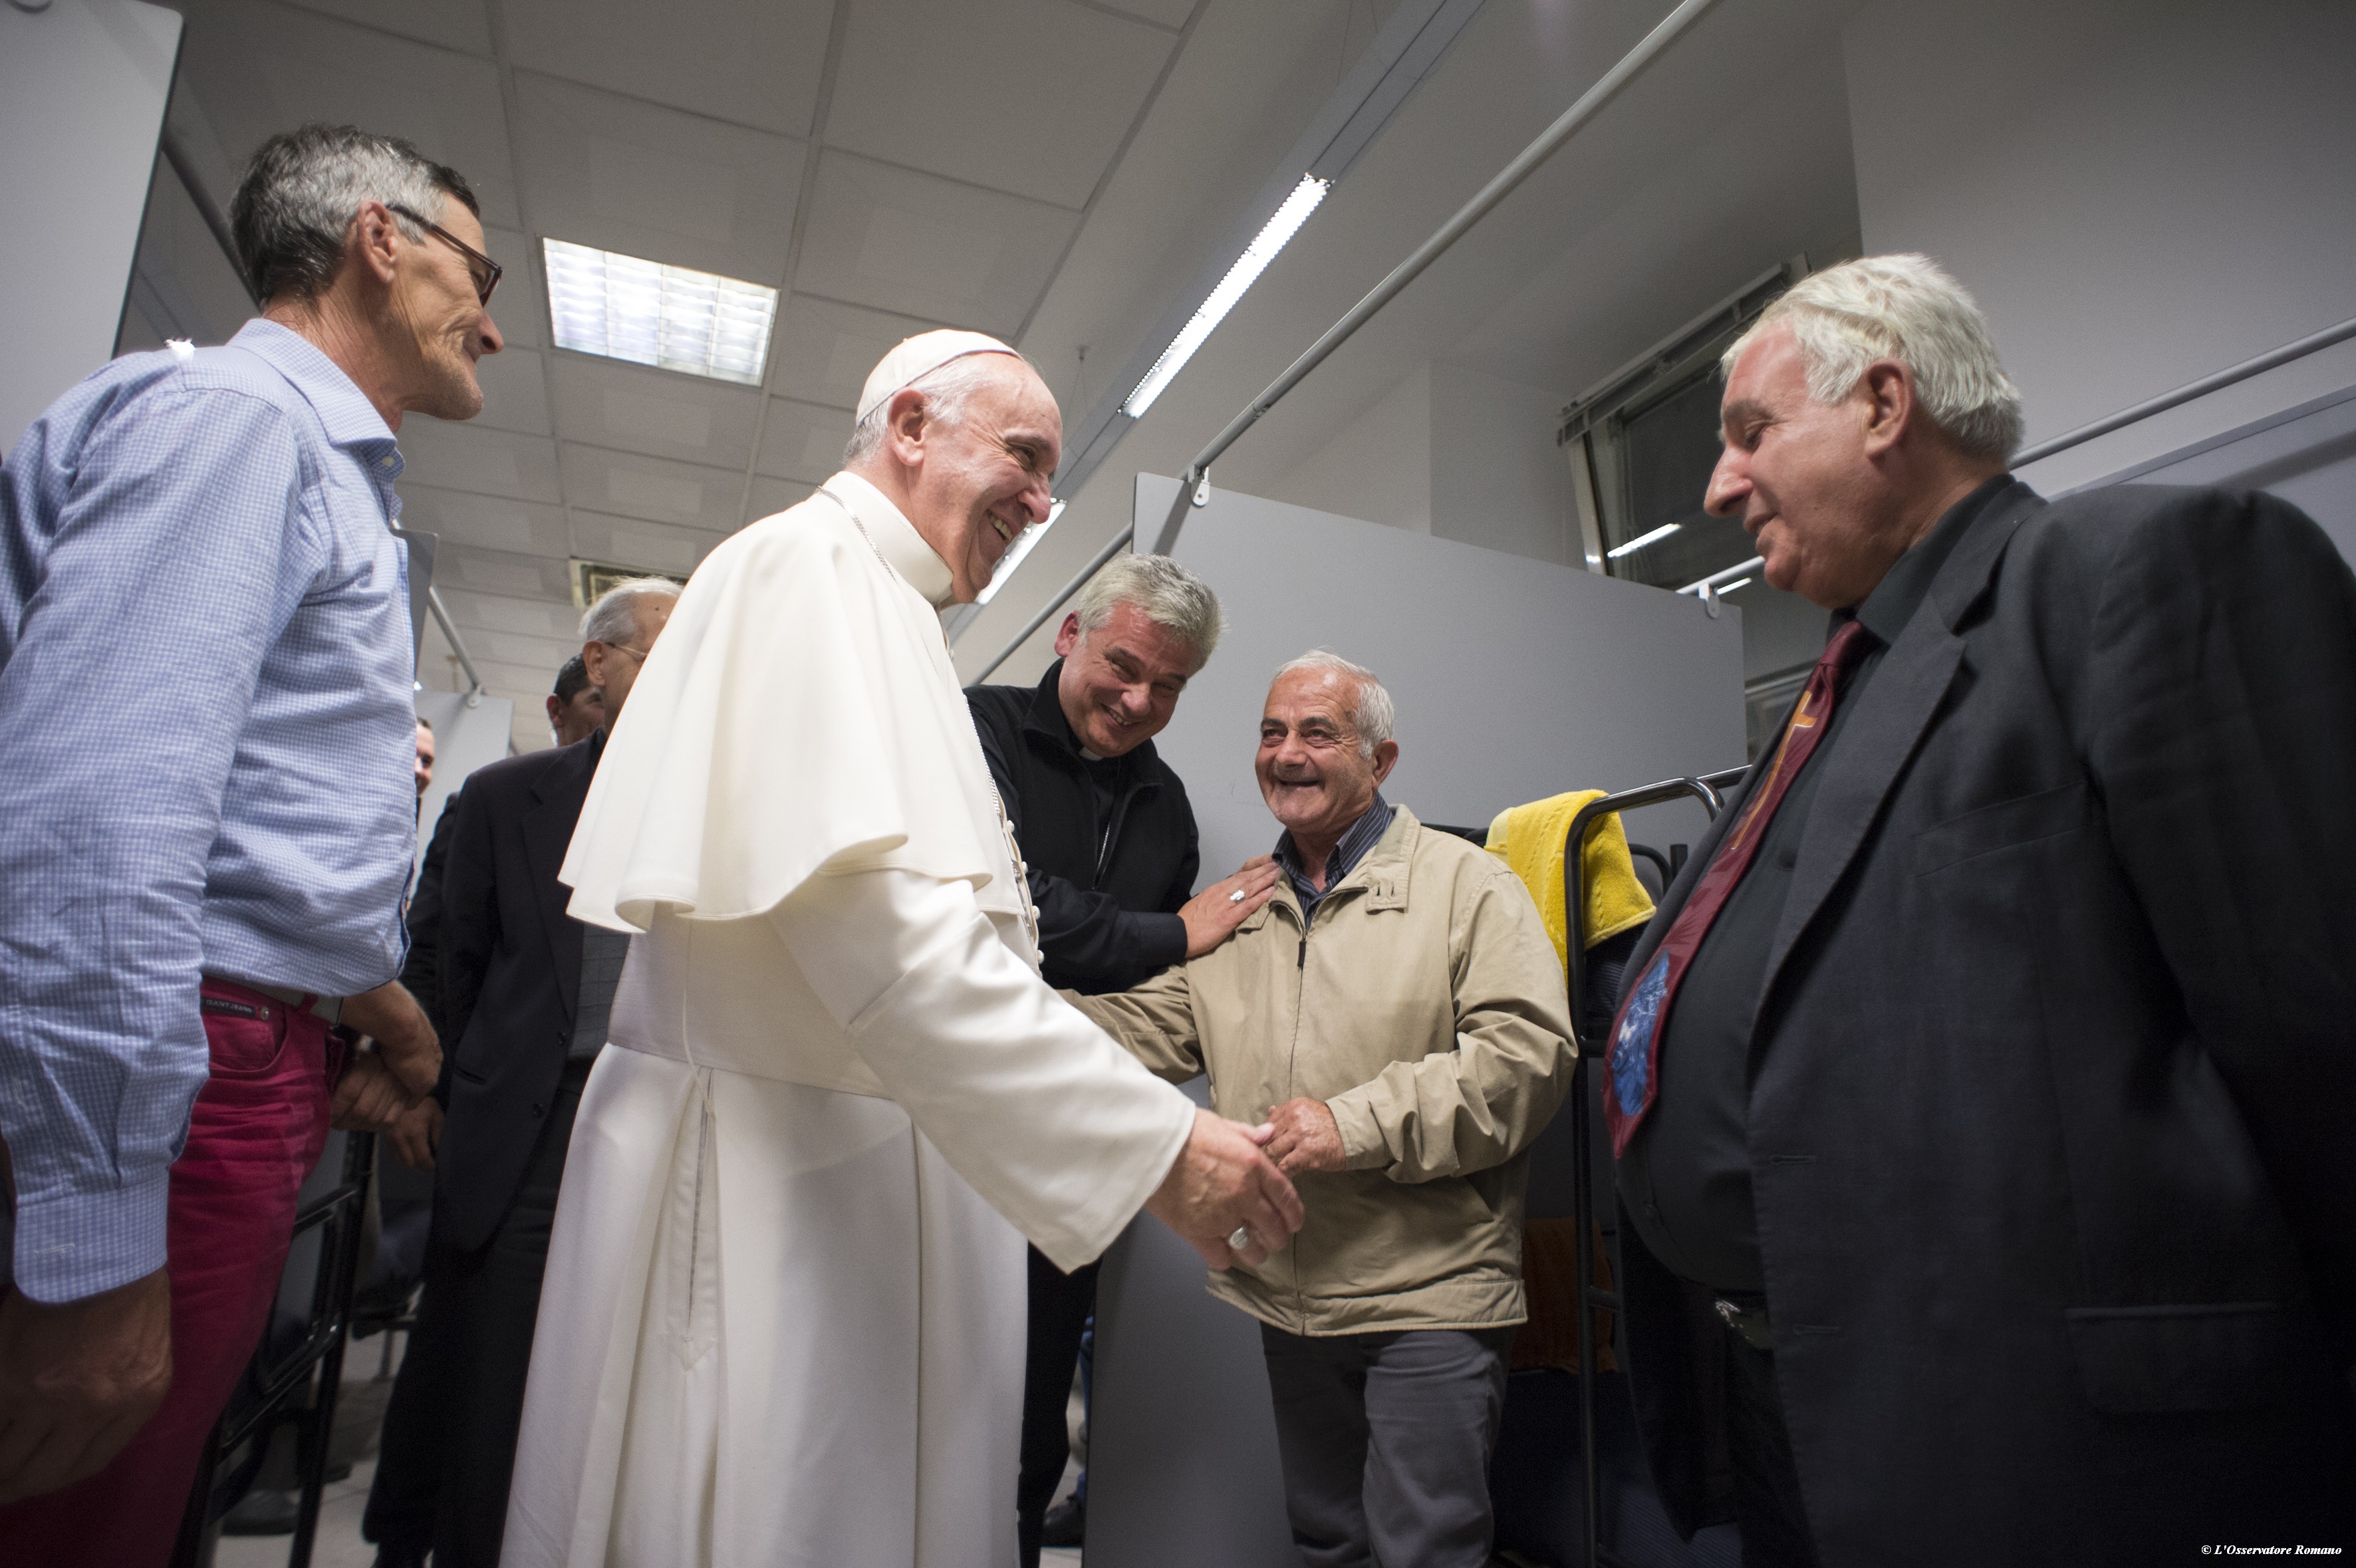 Pope Francis visited the new dormitory for the homeless on Thursday evening